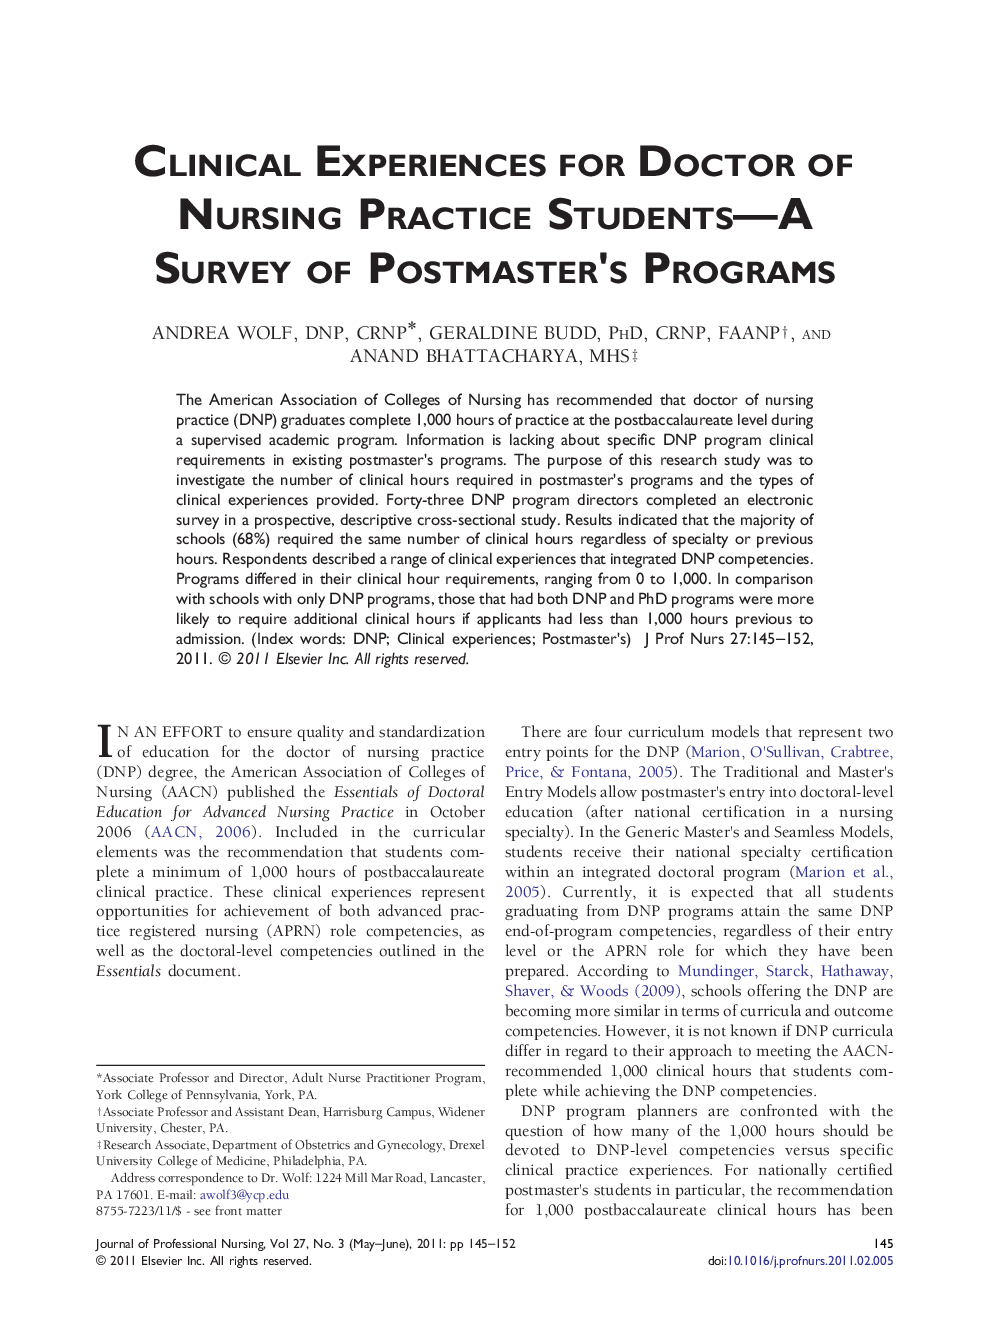 Clinical Experiences for Doctor of Nursing Practice Students—A Survey of Postmaster's Programs